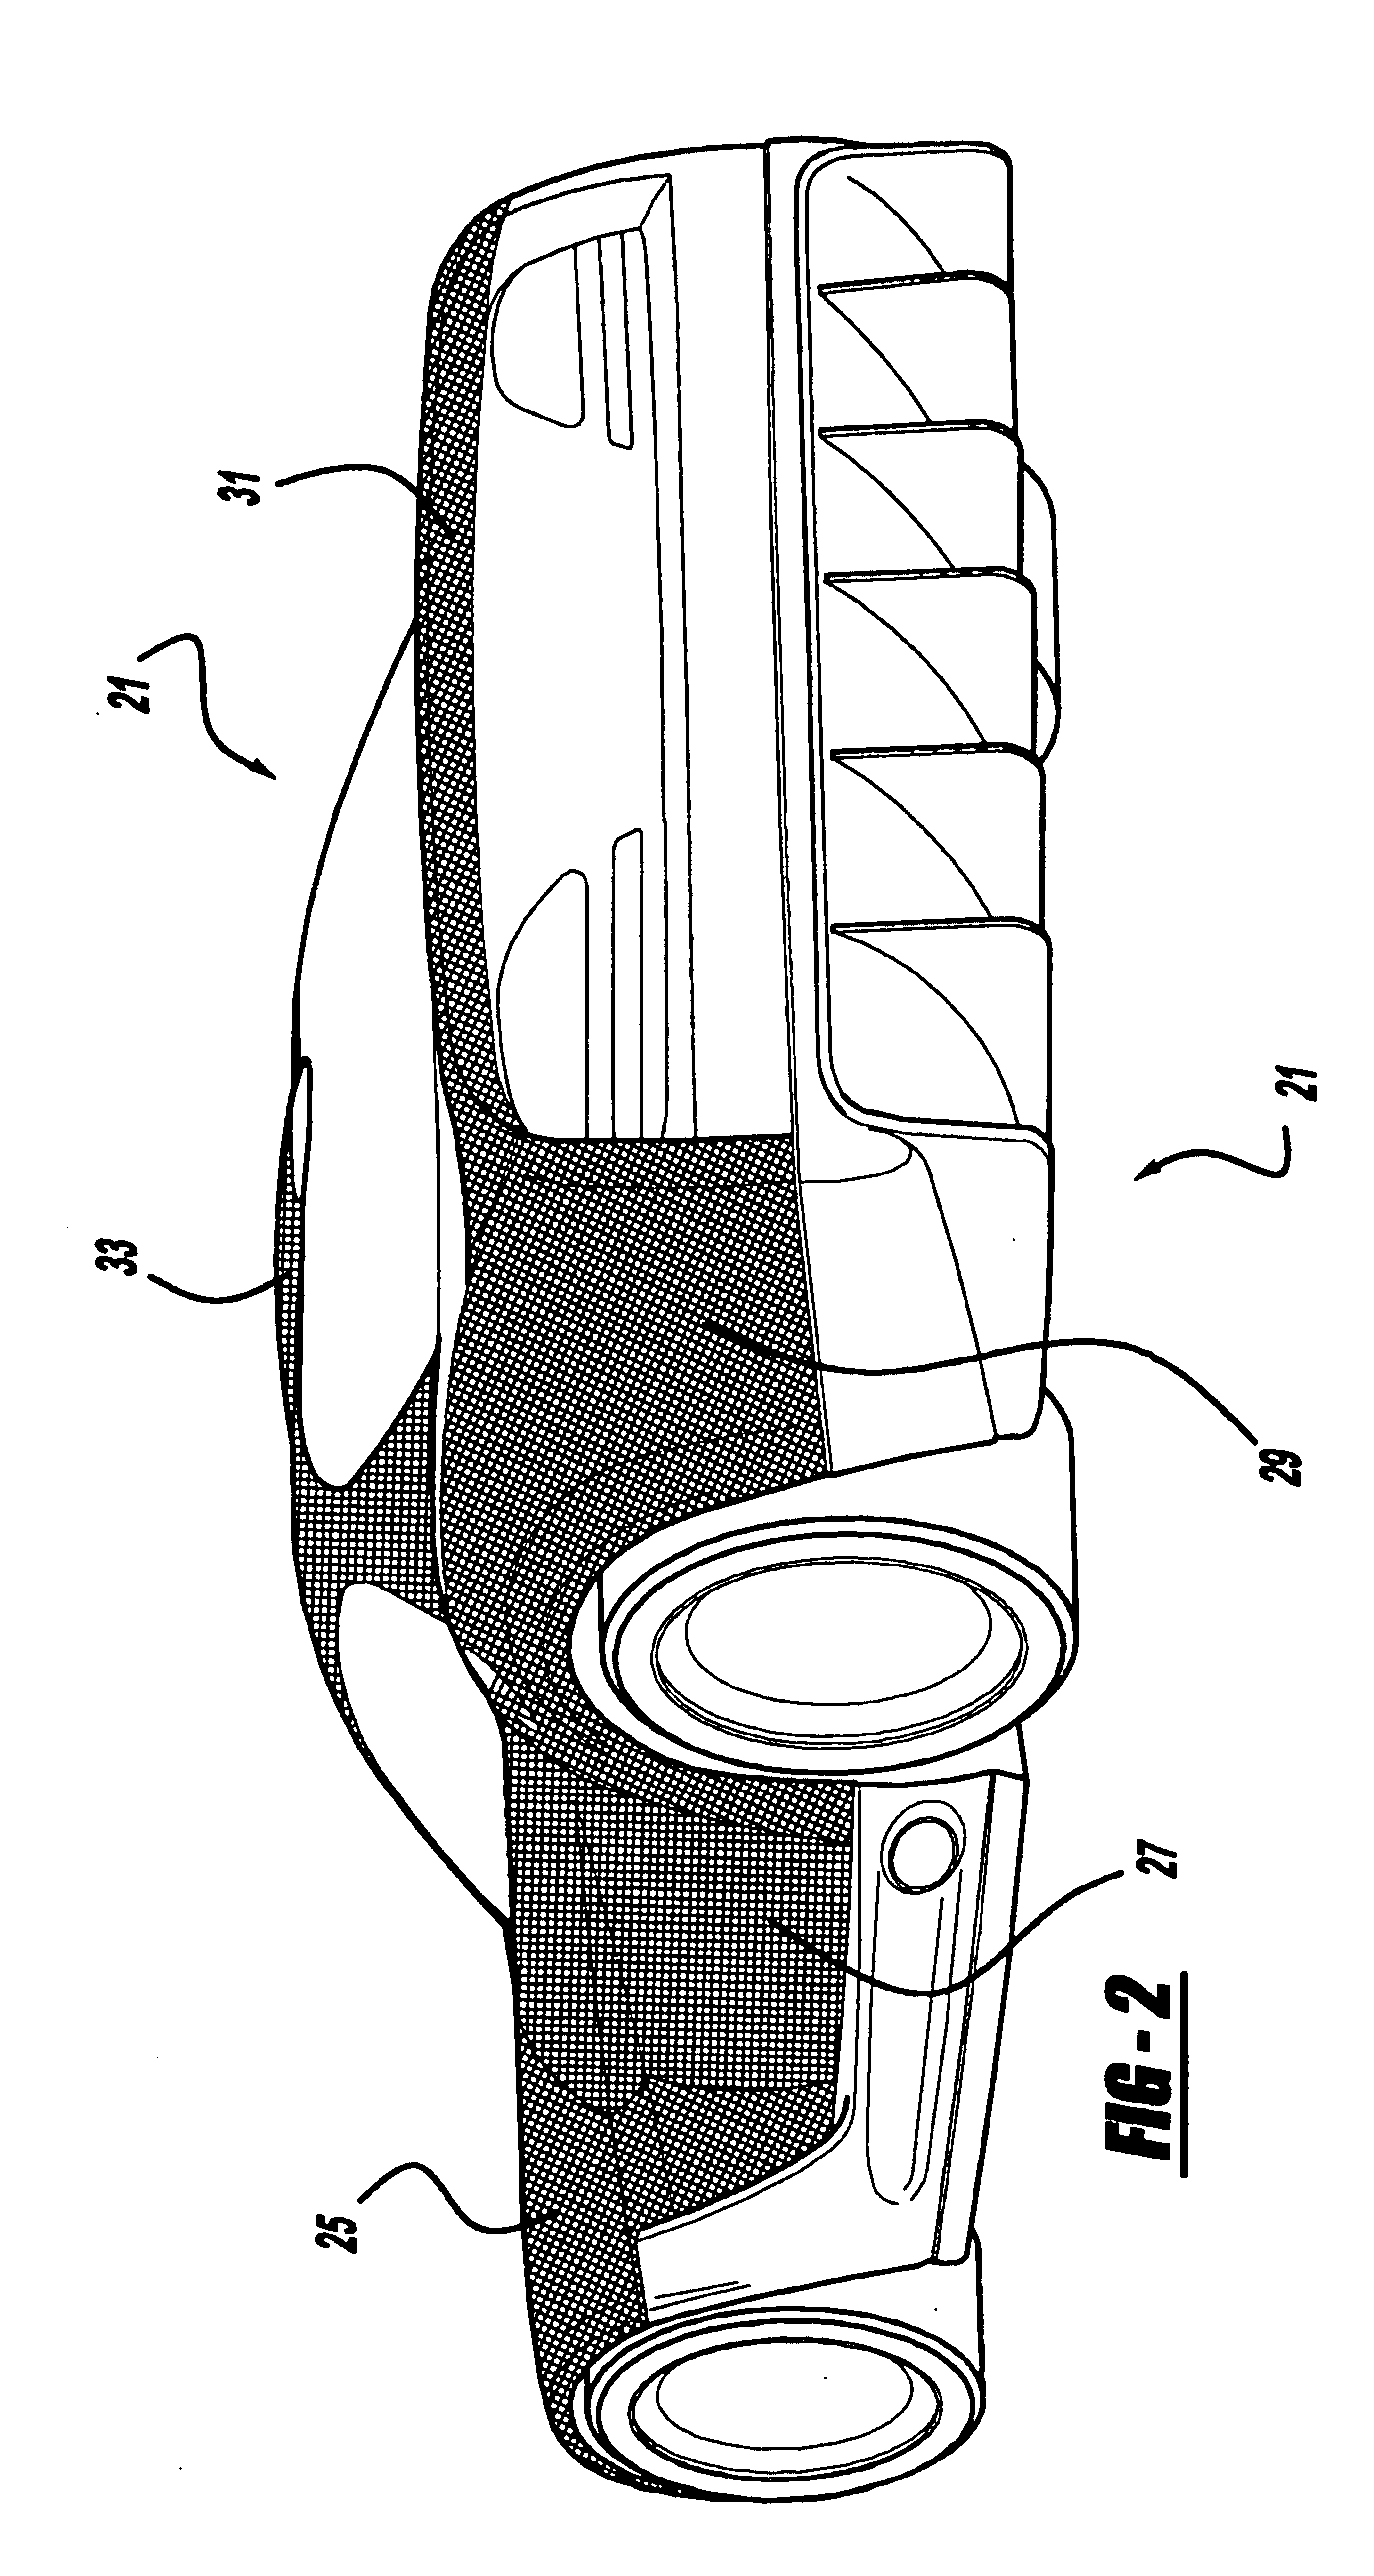 Composite product and forming system